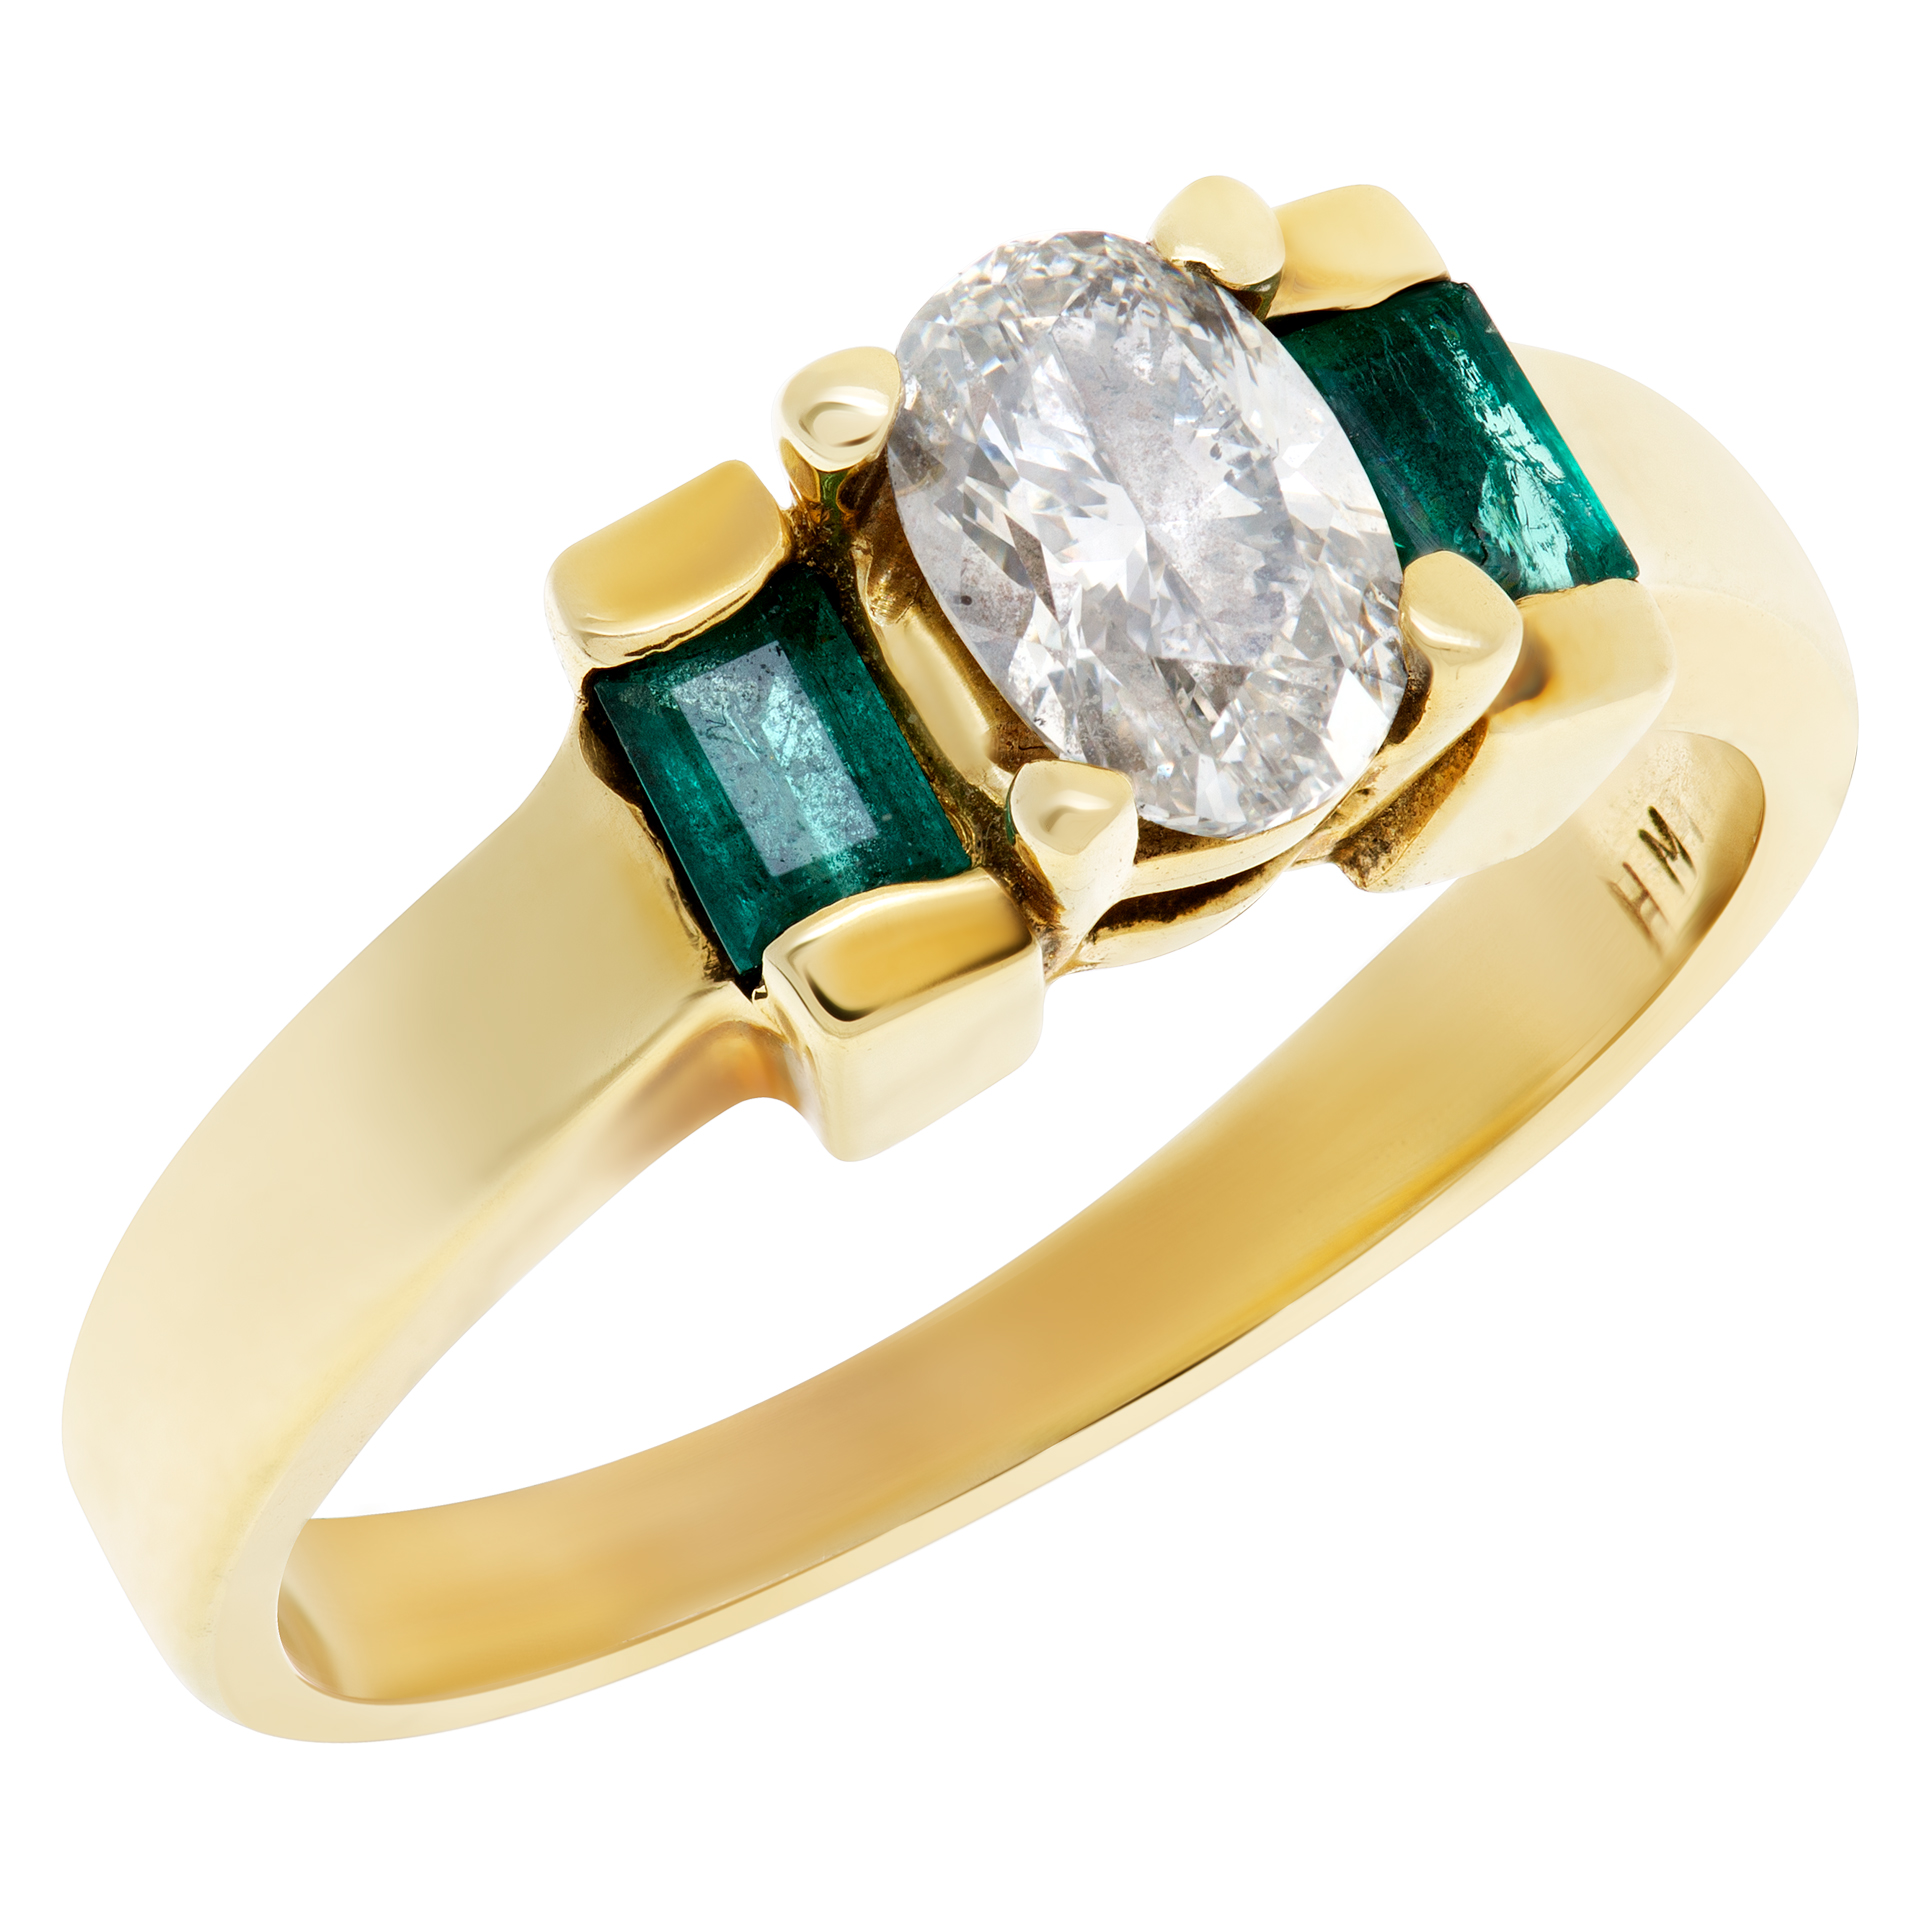 Adorable diamond and emerald ring in 14k. 0.50cts oval diamond (H-I, VS2) image 3